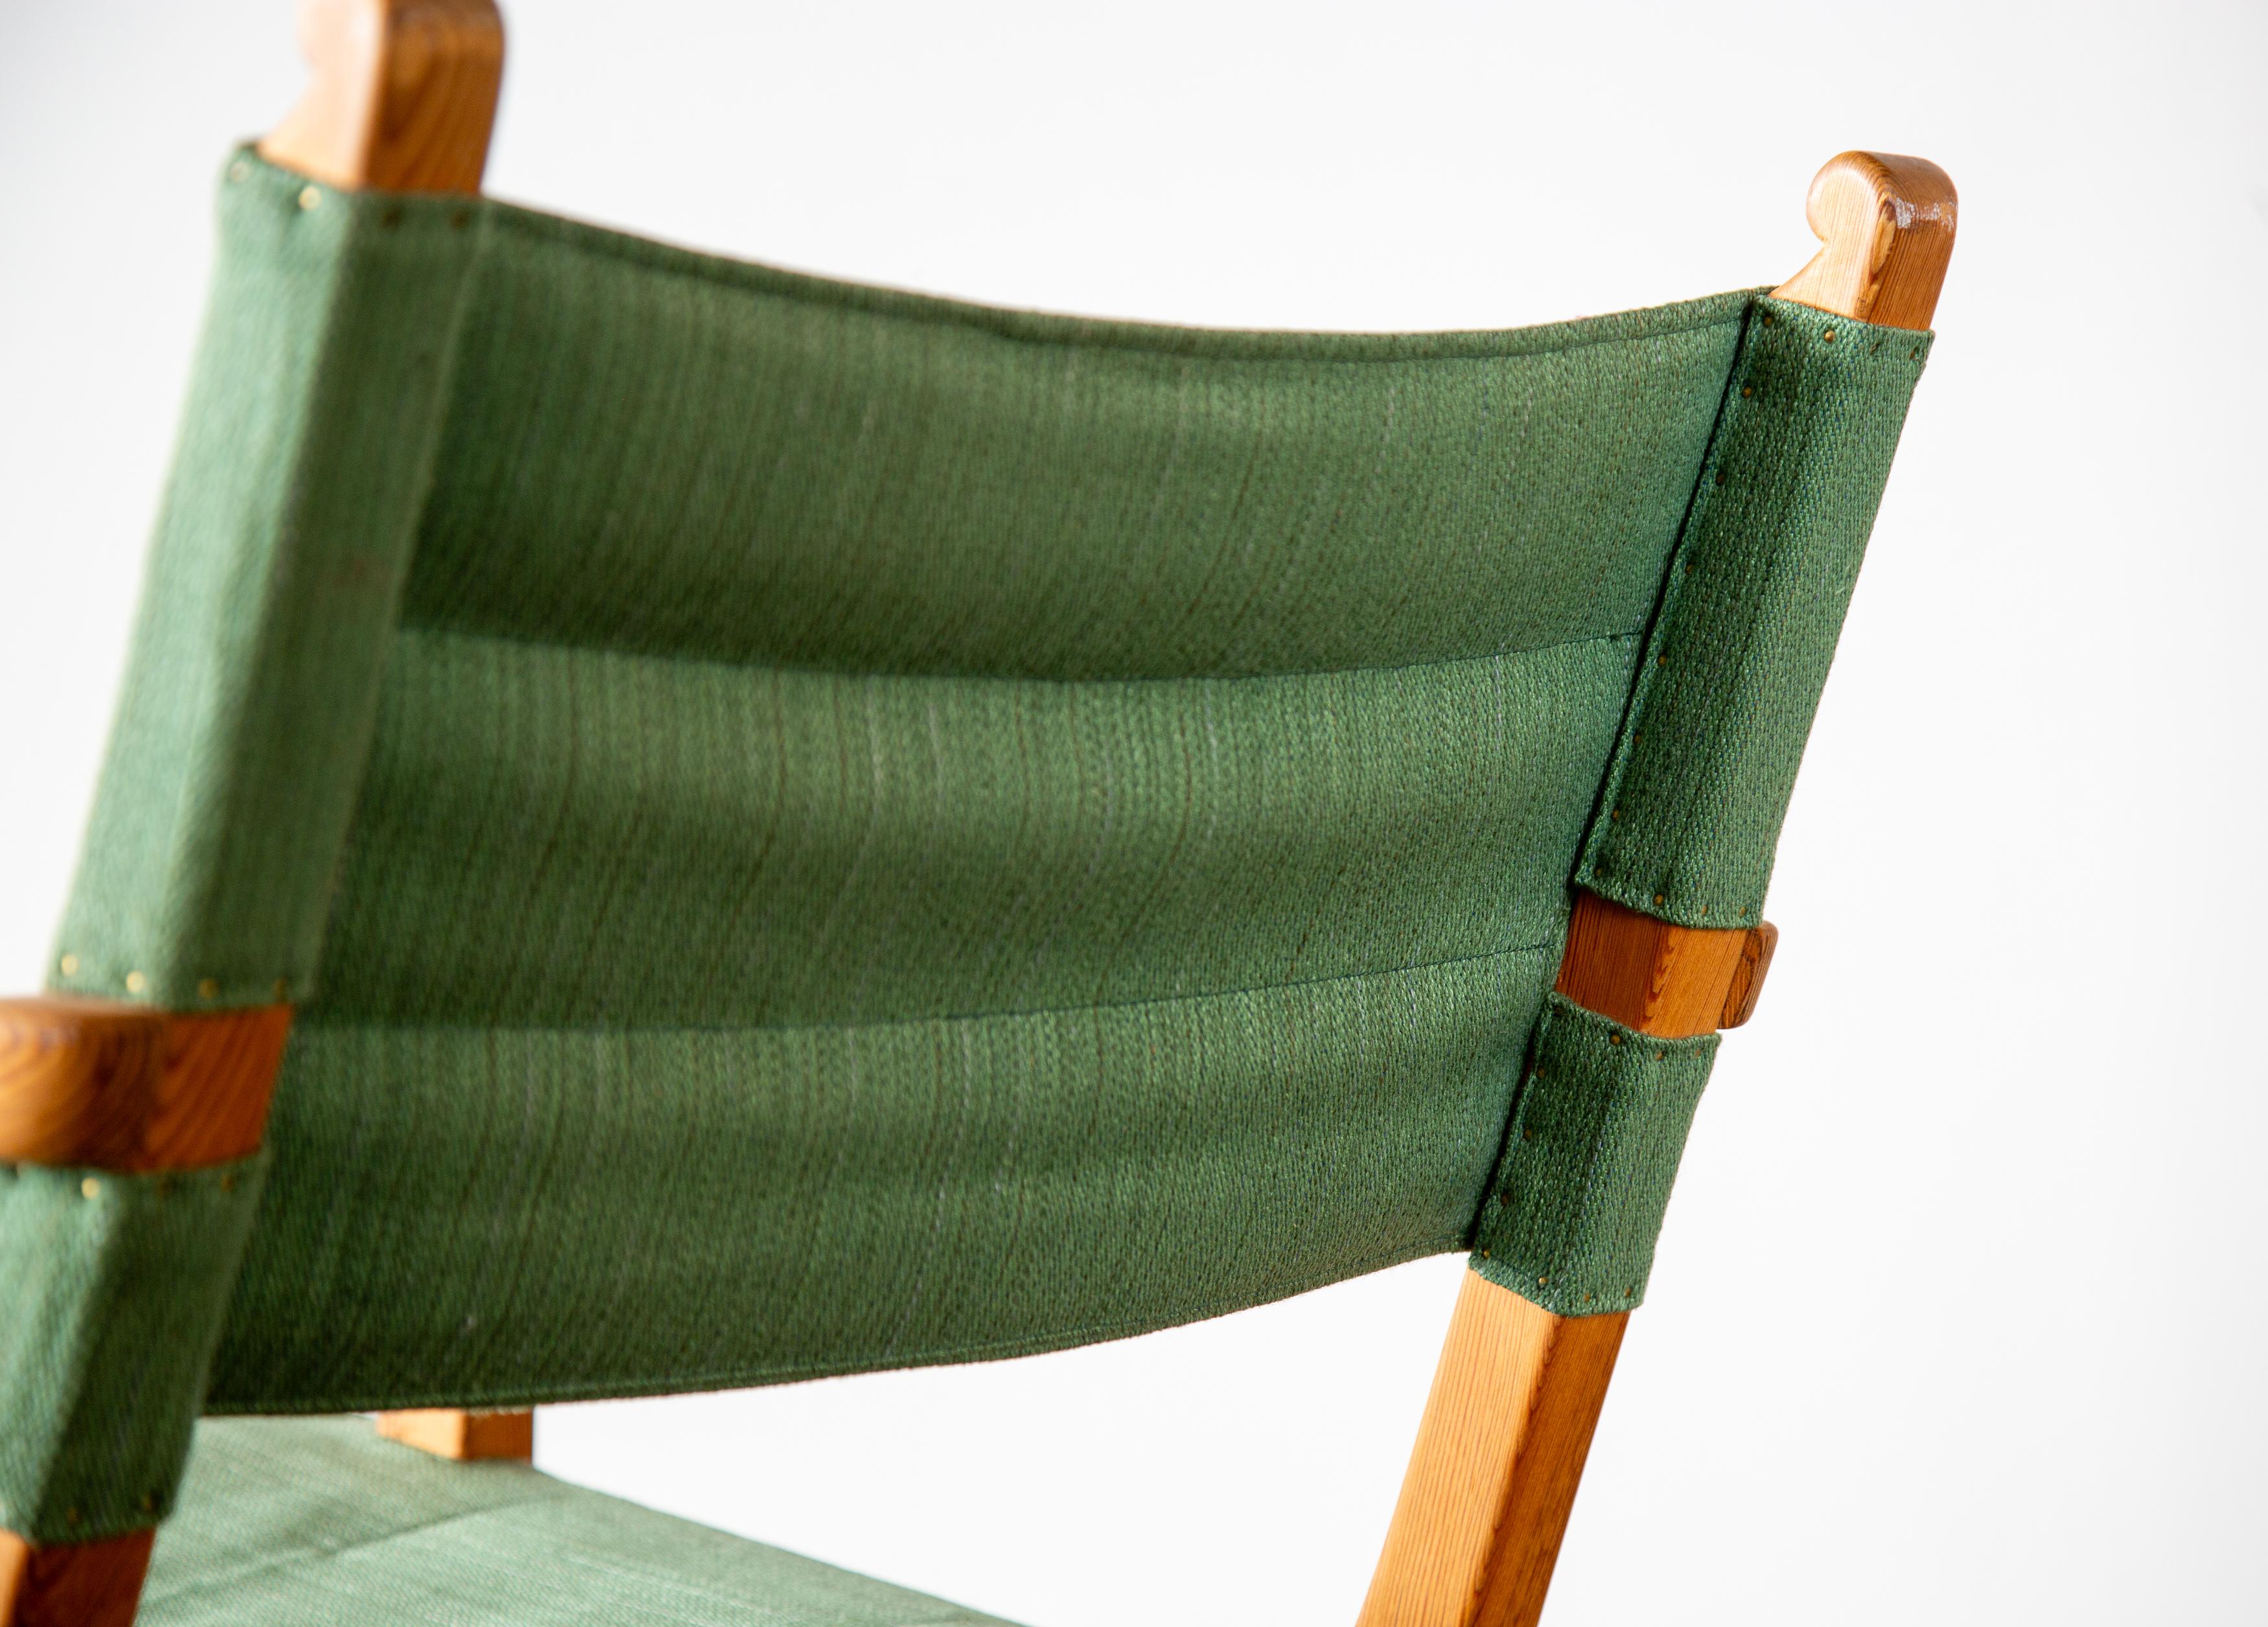 Pine Carl Malmsten Hangsits armchair in solid pine and green fabric c. 1947 For Sale